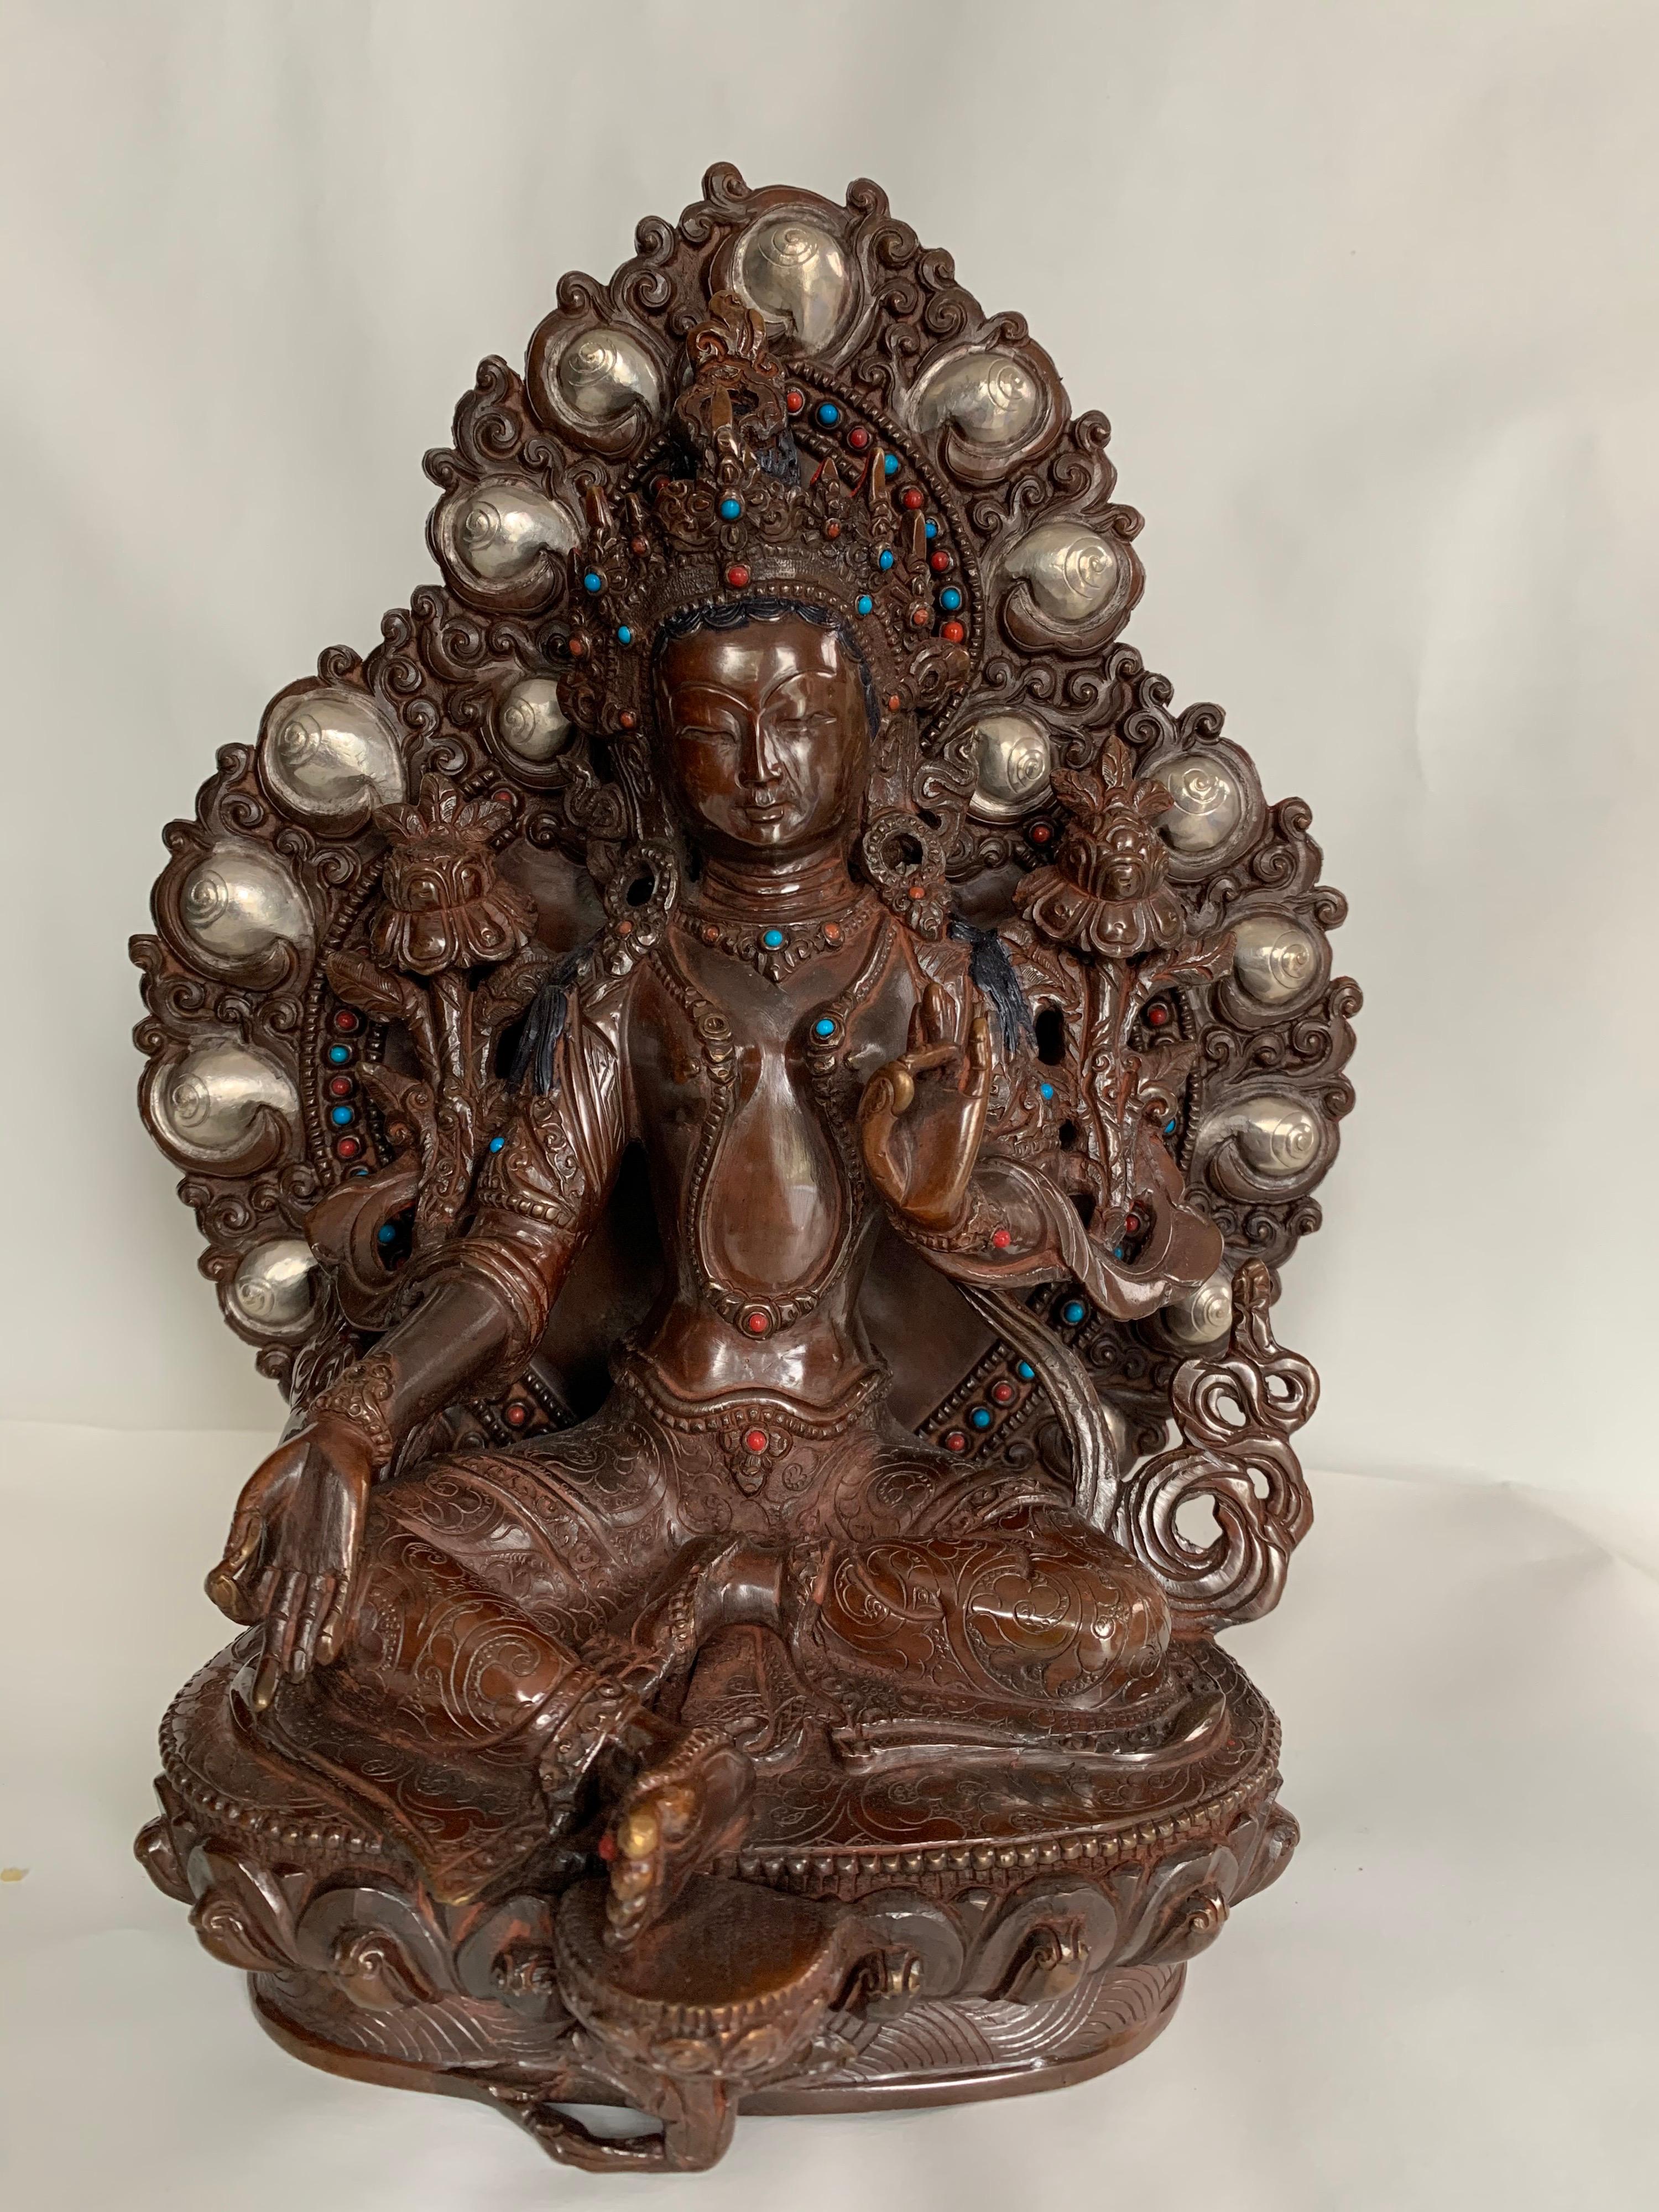 Unknown Figurative Sculpture - Green Tara Statue 10 Inch with Silver Handcrafted by Lost Wax Process